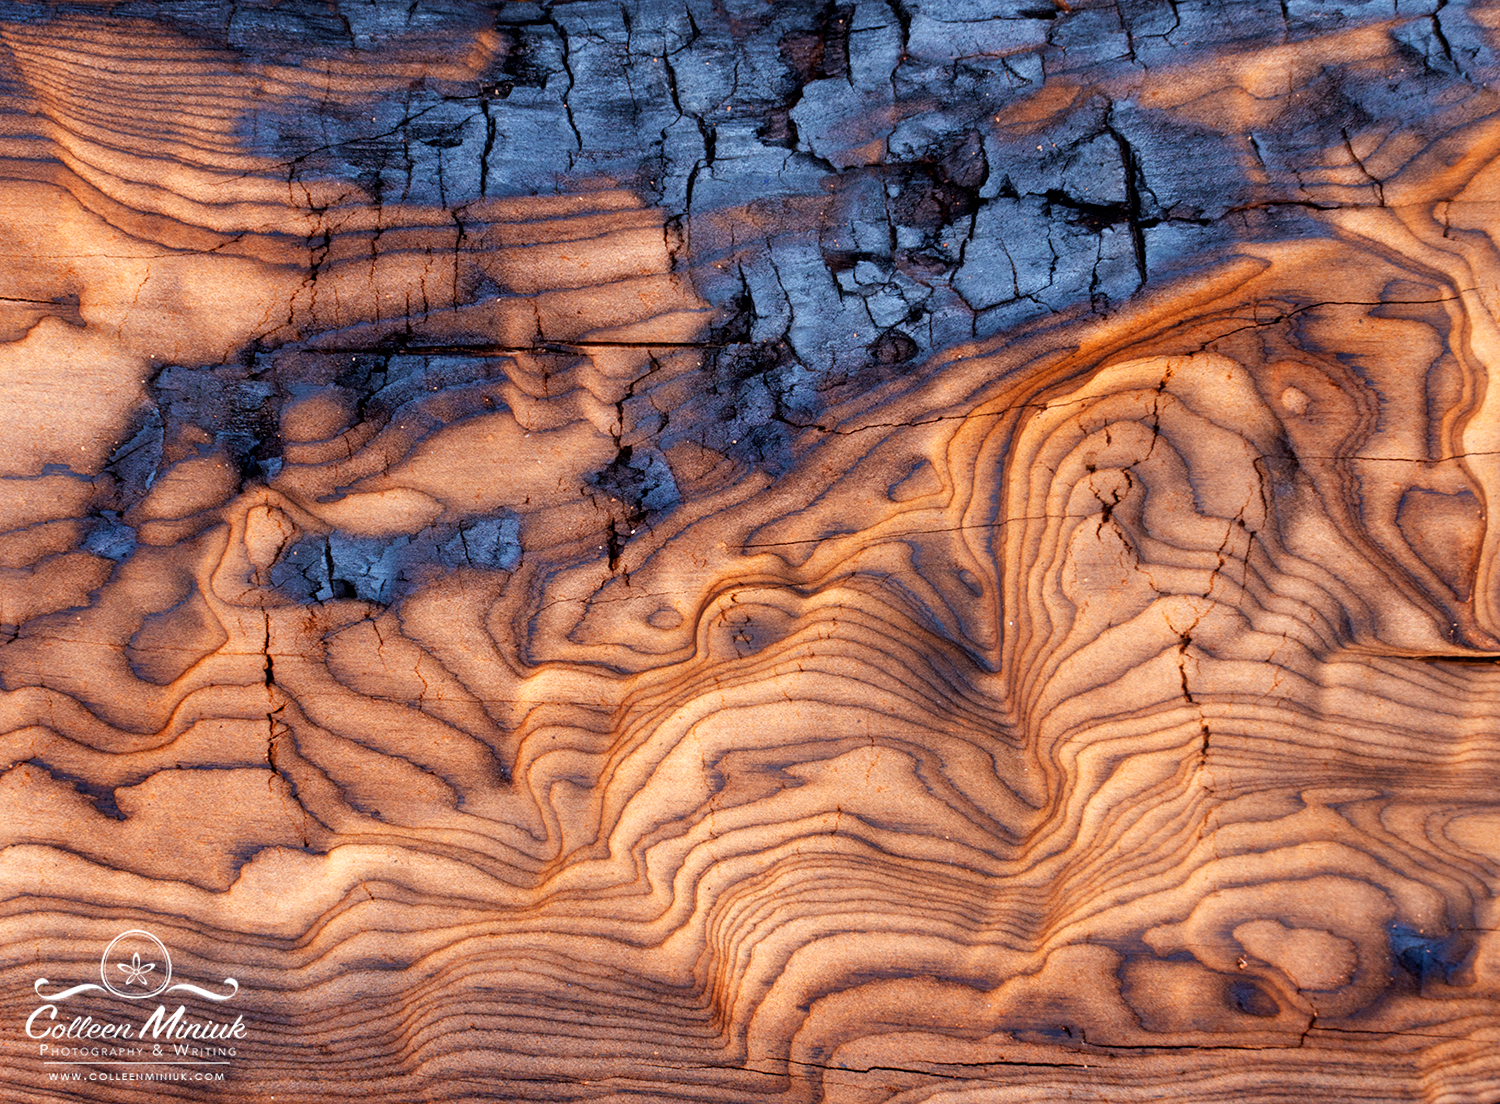 Abstract burned wood patterns left behind by the Fuller Fire (2016) in the Saddle Mountain Wilderness area in northern Arizona, USA